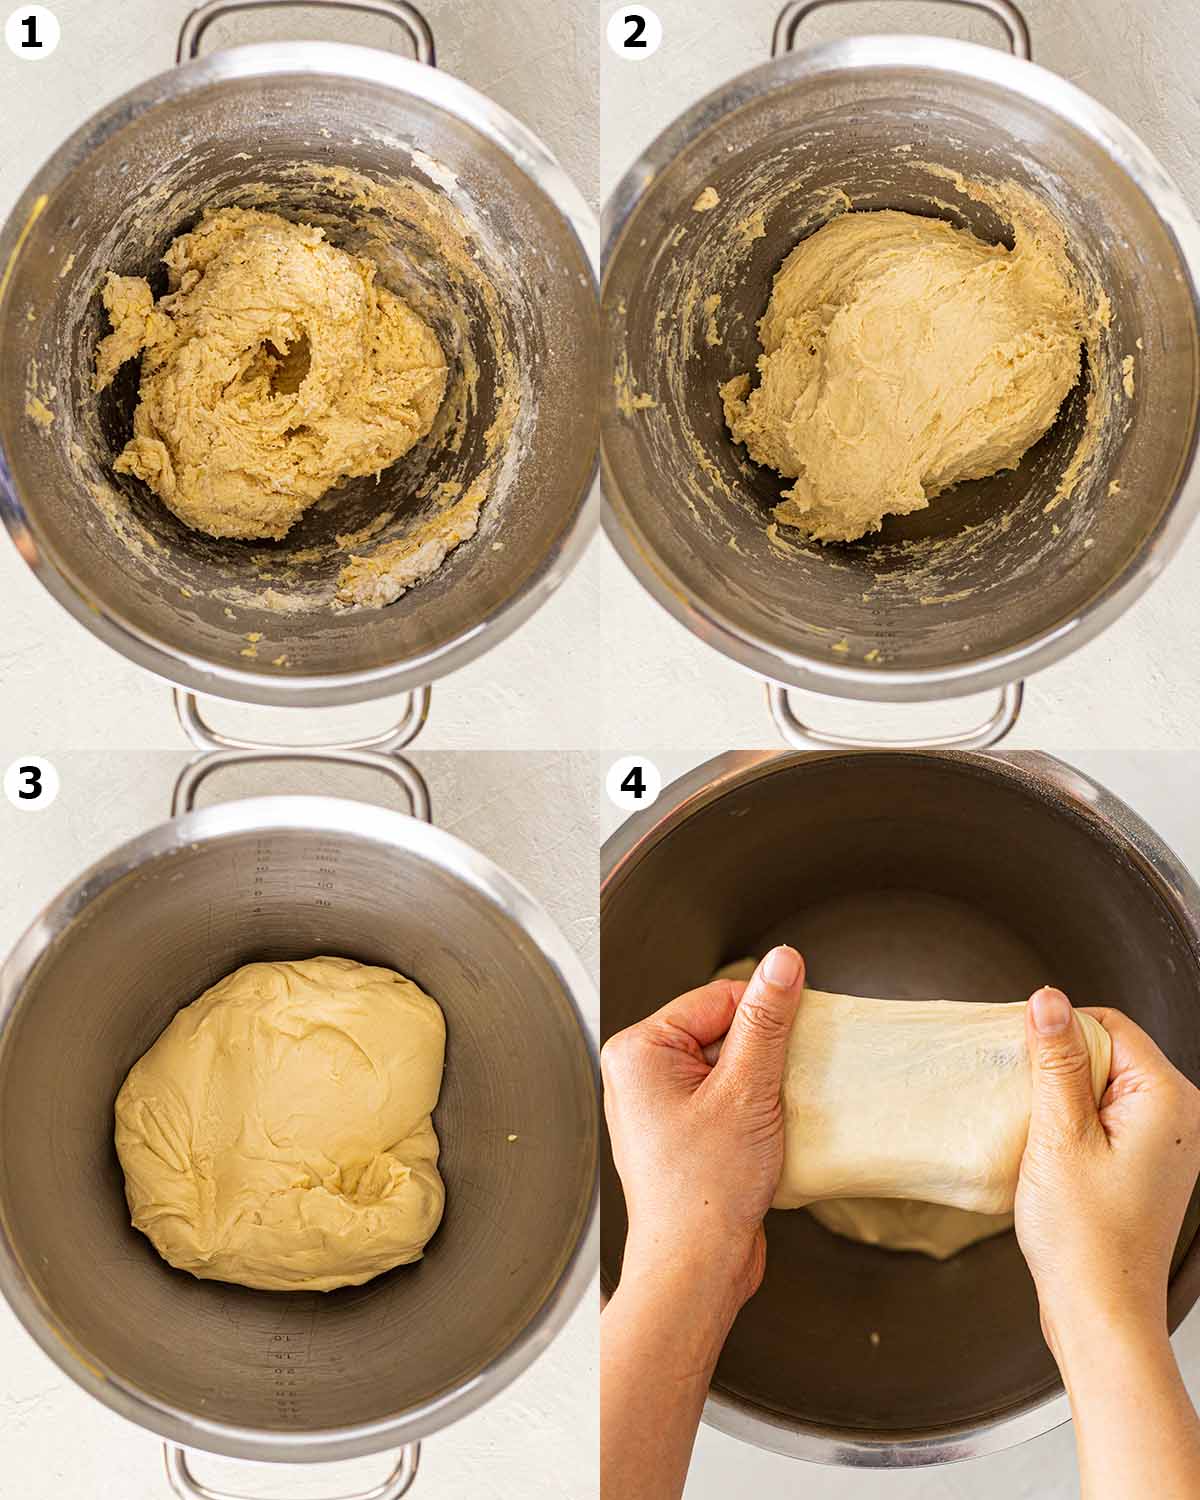 Four image collage of the brioche dough showing the different stages of the dough during kneading. Final image shows the dough with the windowpane test.